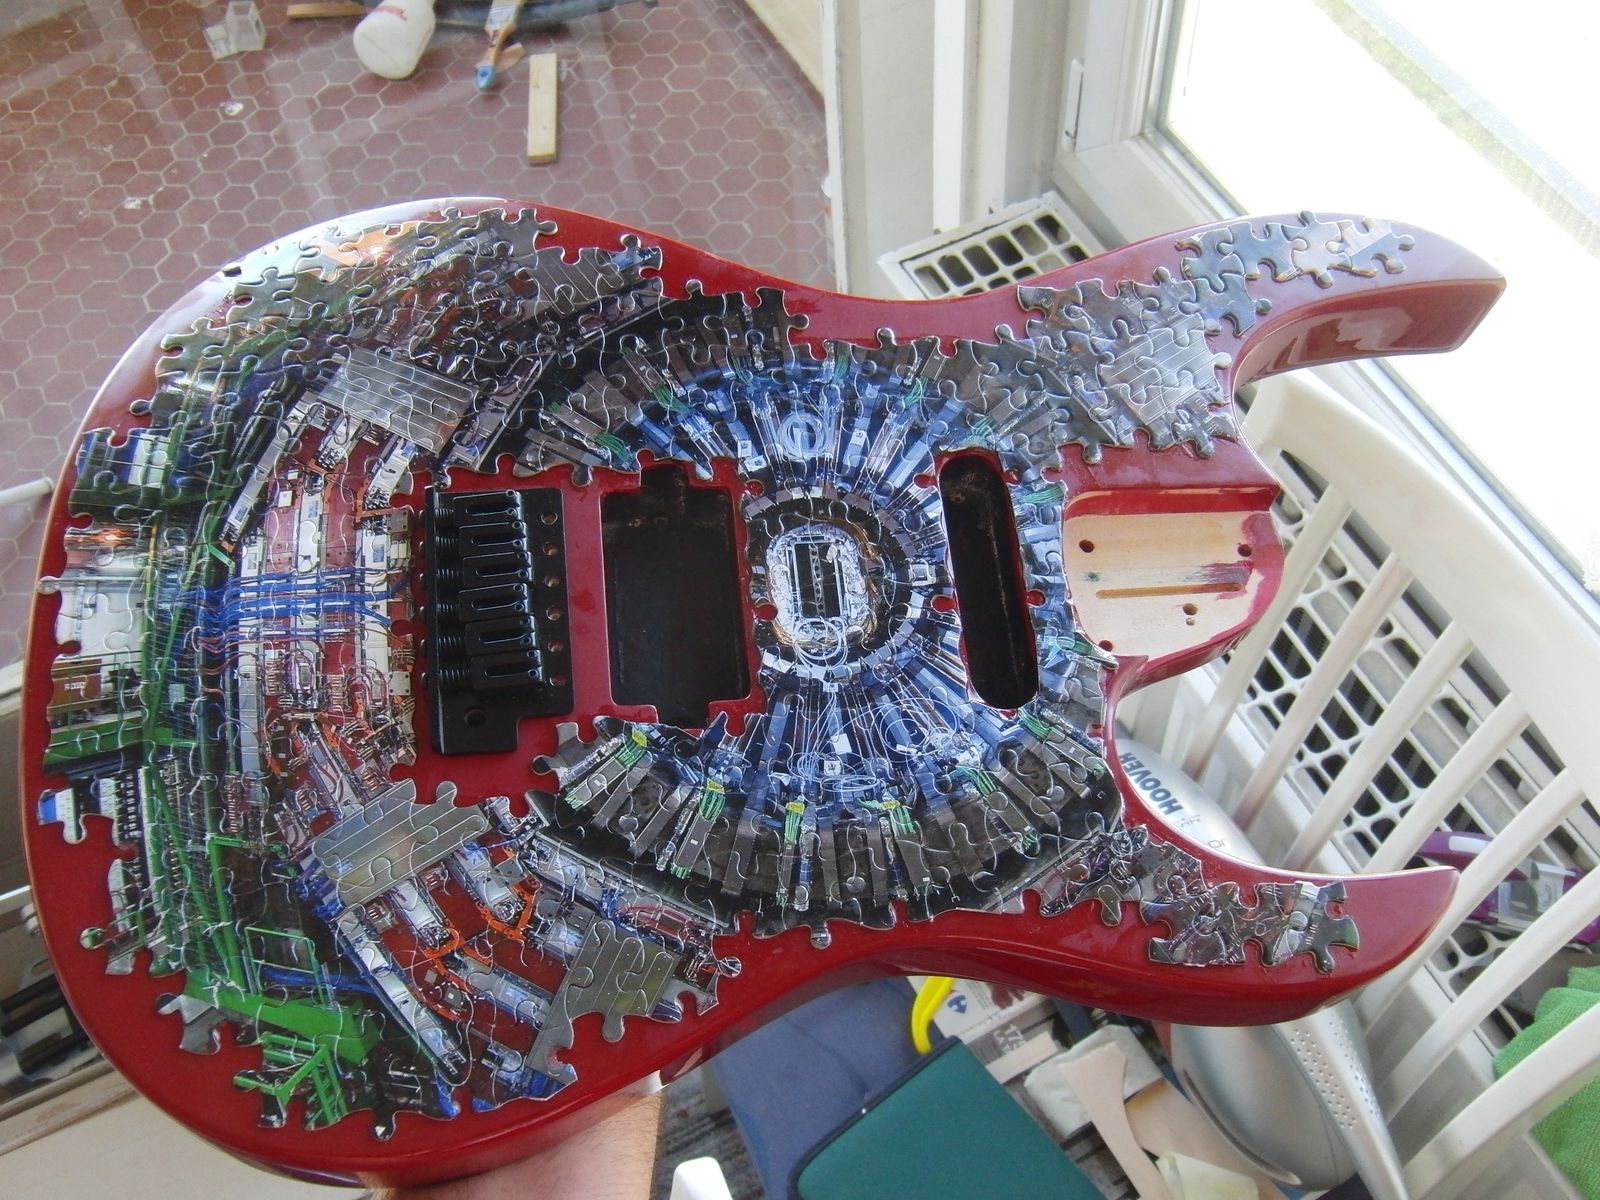 The jigsaw-puzzle body of the CMS guitar